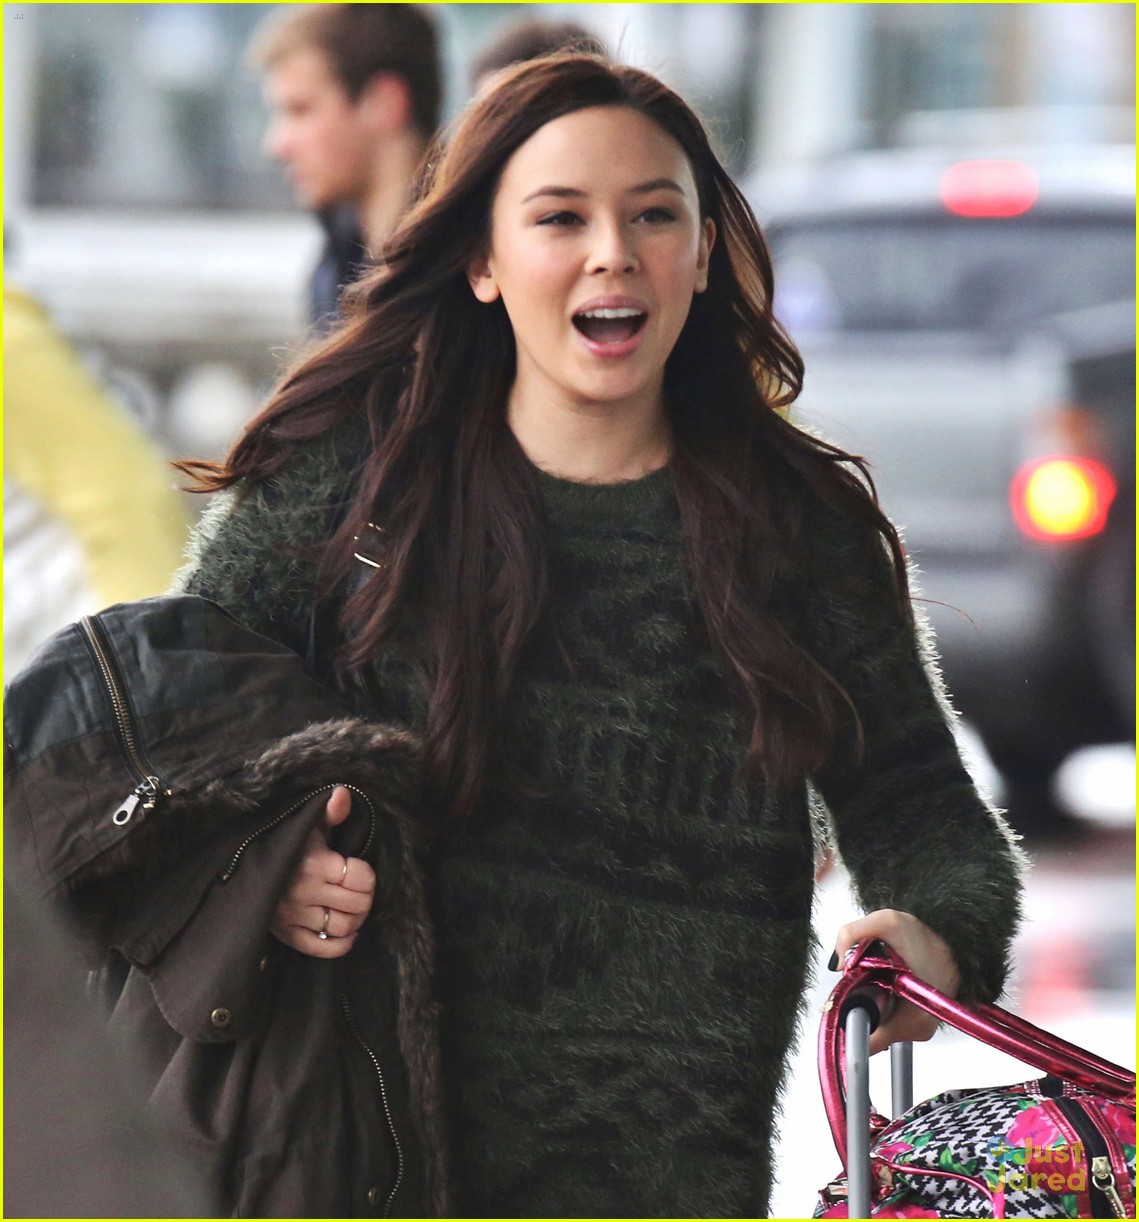 malese jow exits vancouver for holidays 04